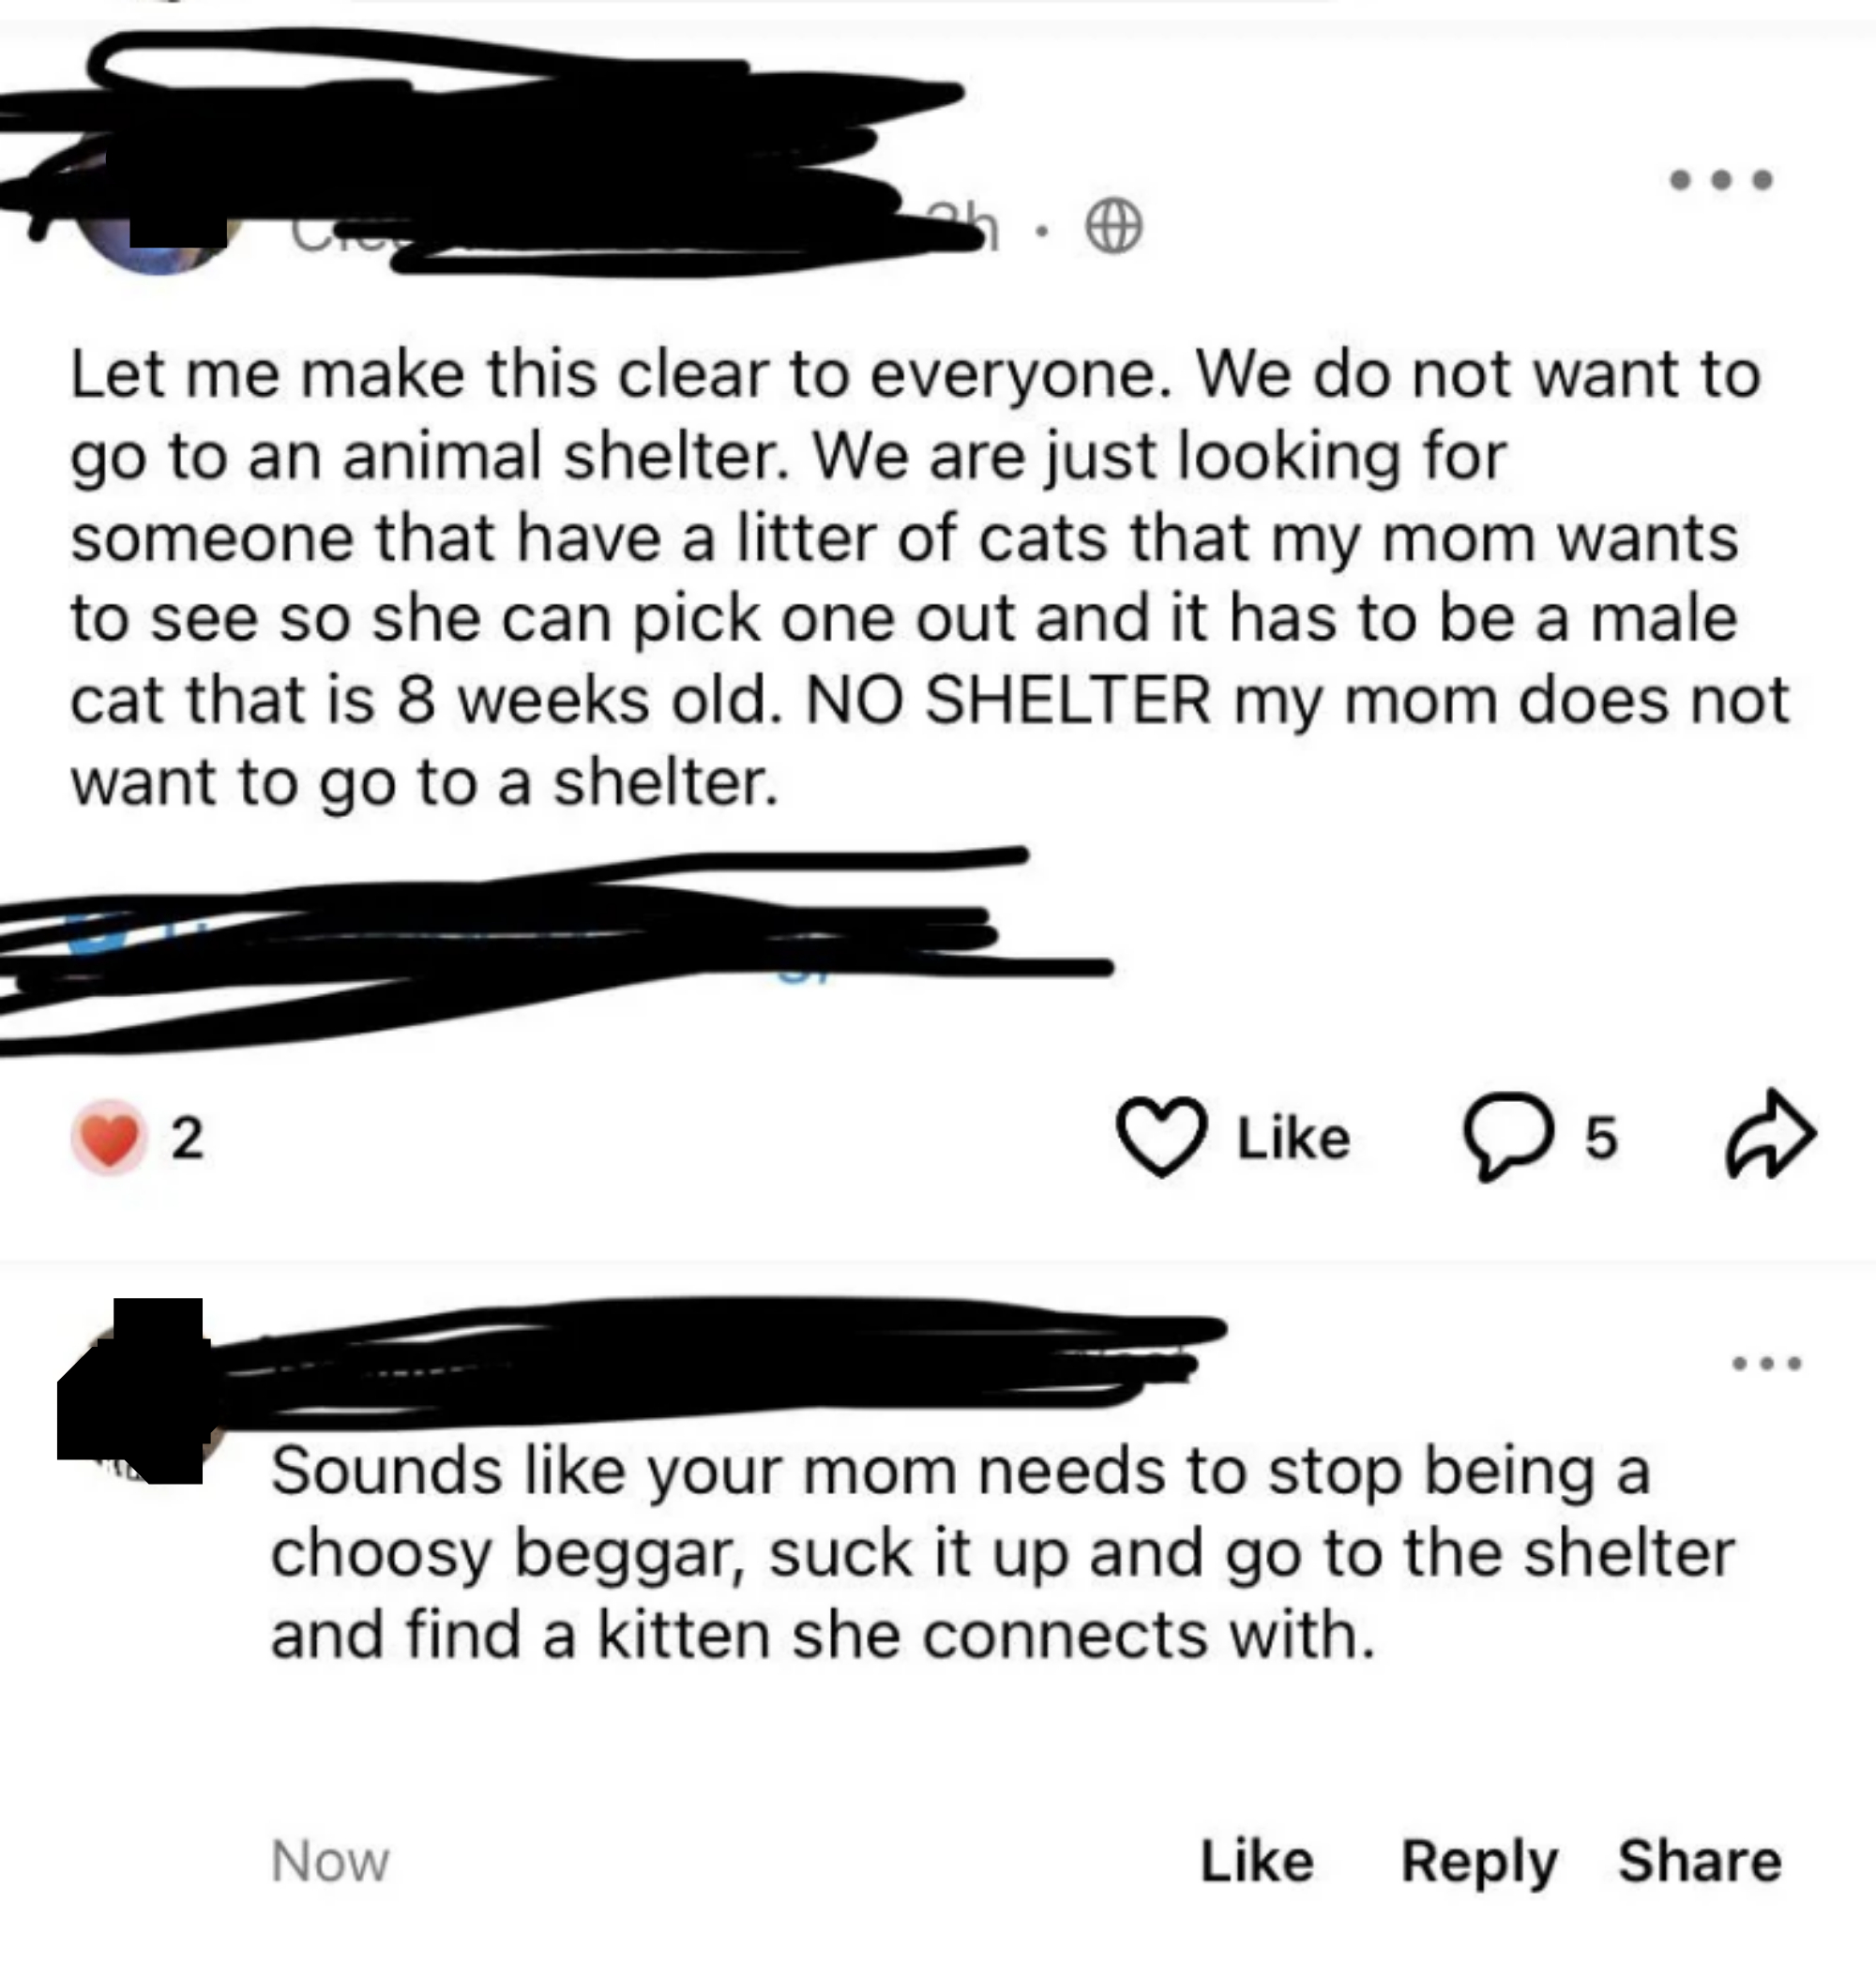 &quot;Sounds like your mom needs to stop being a choosy beggar, suck it up and go to the shelter and find a kitten she connects with.&quot;